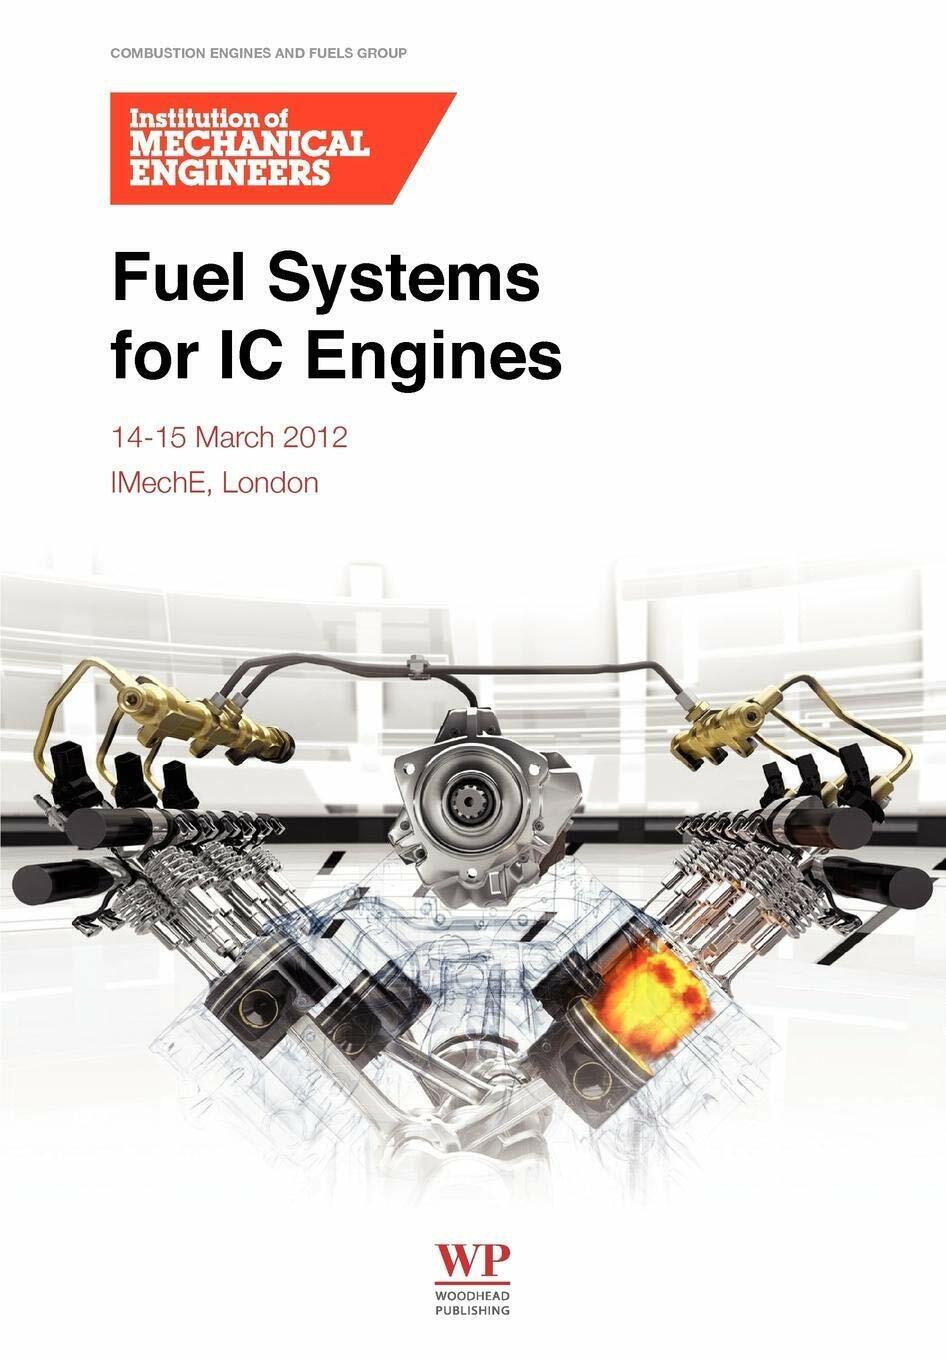 Fuel Systems for IC Engines - Institution of Mechanical Engineers - 2012